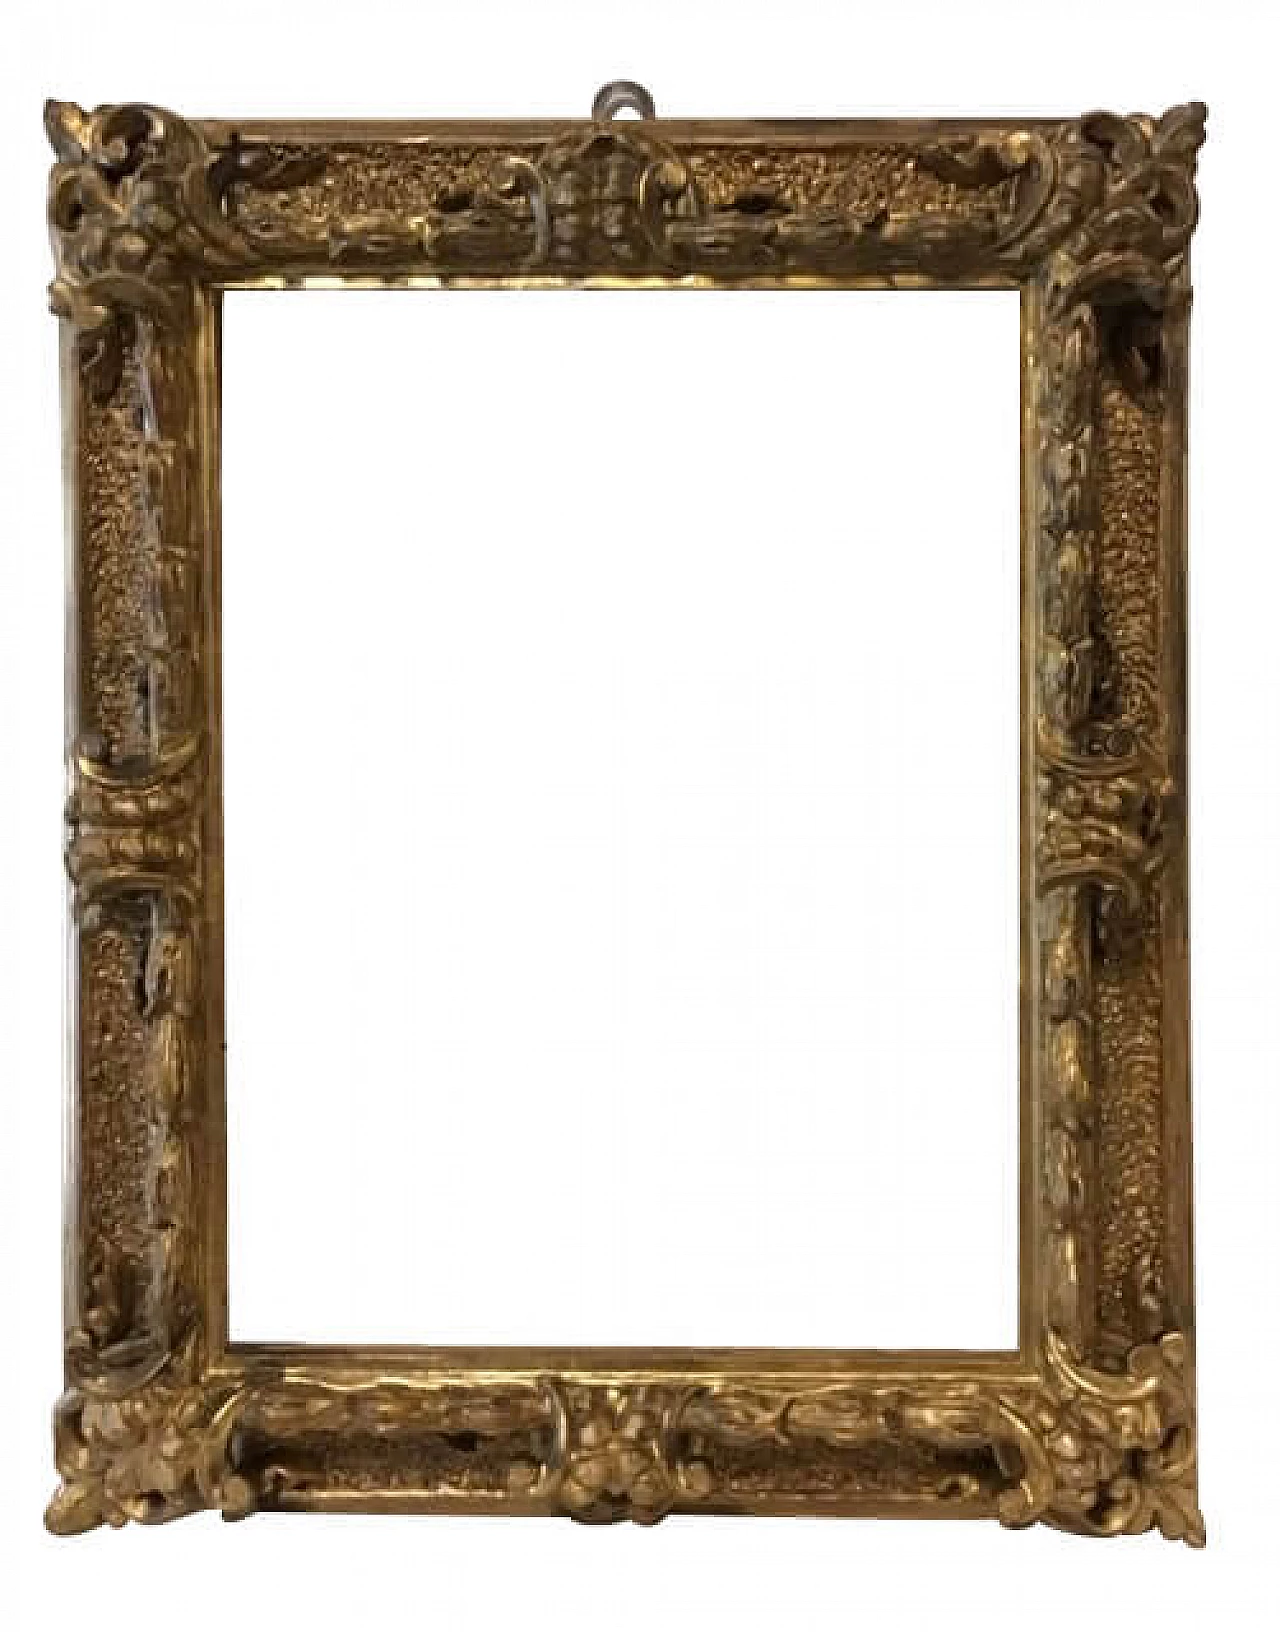 Leaf-shaped gilded wooden frame, late 19th century 1103156